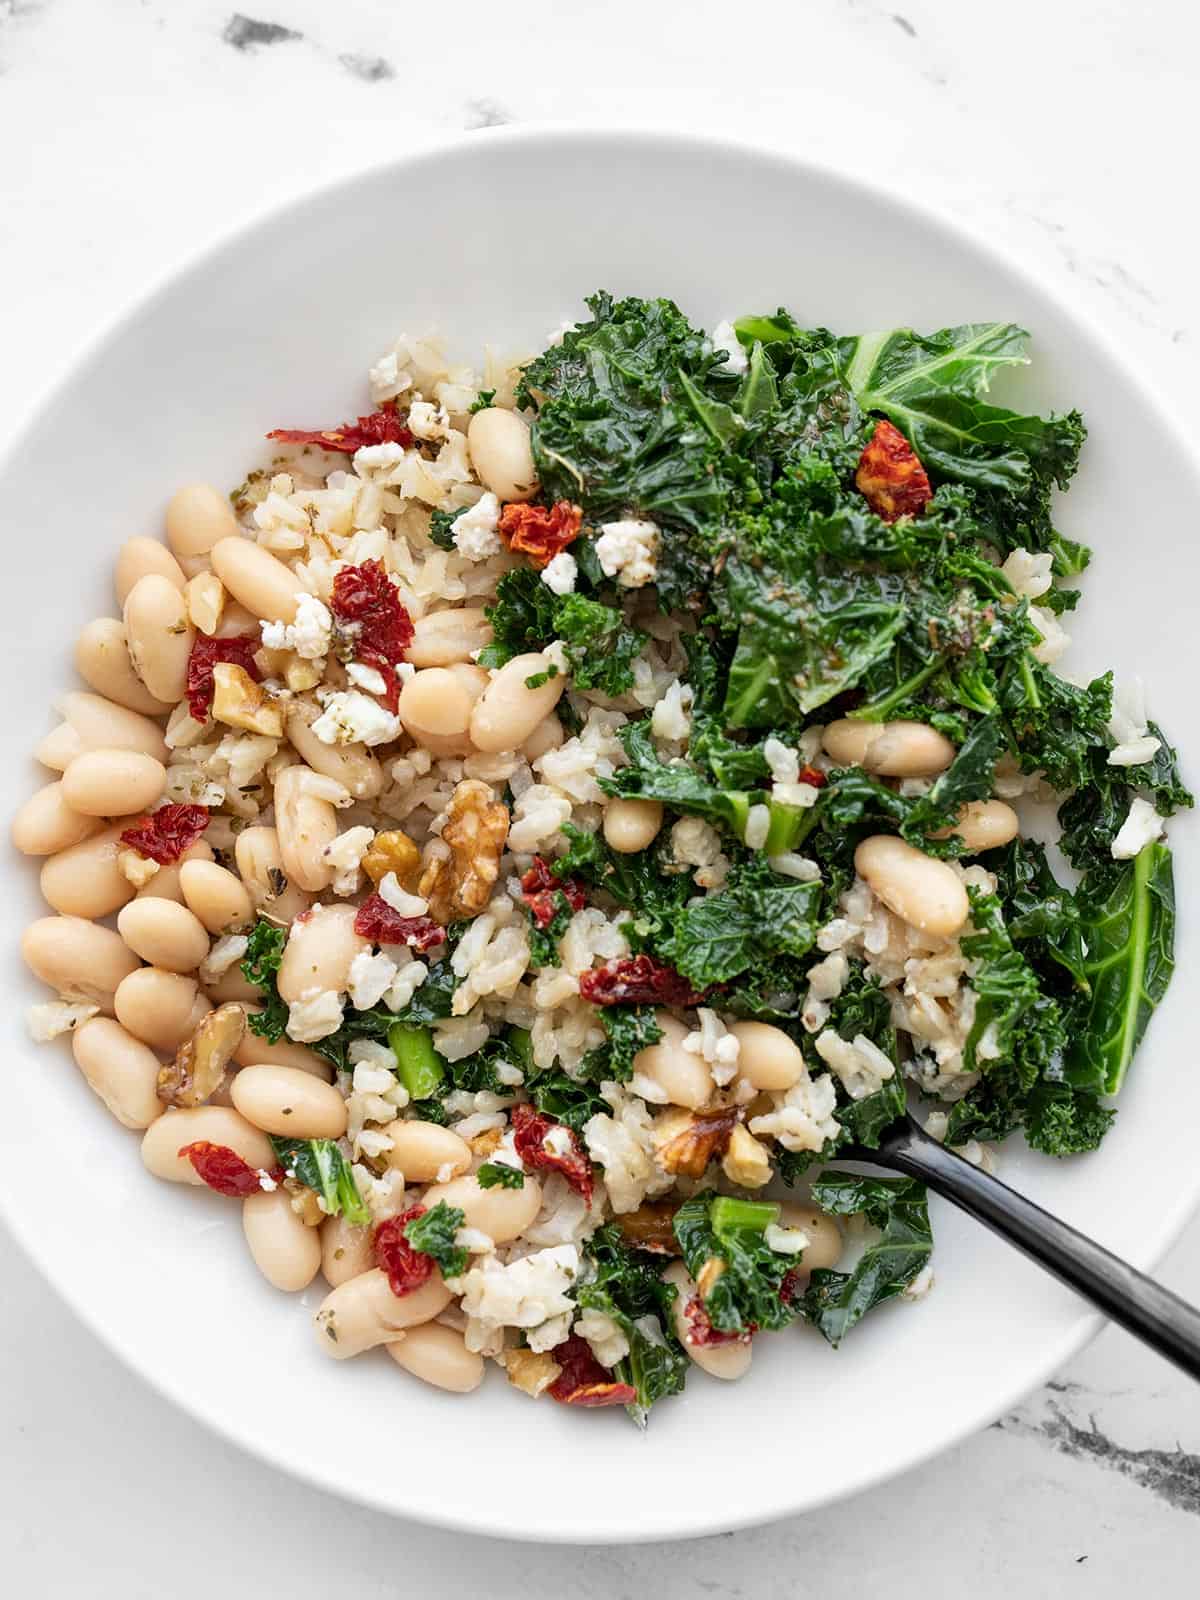 Overhead view of a kale and white bean power bowl with a fork in the side